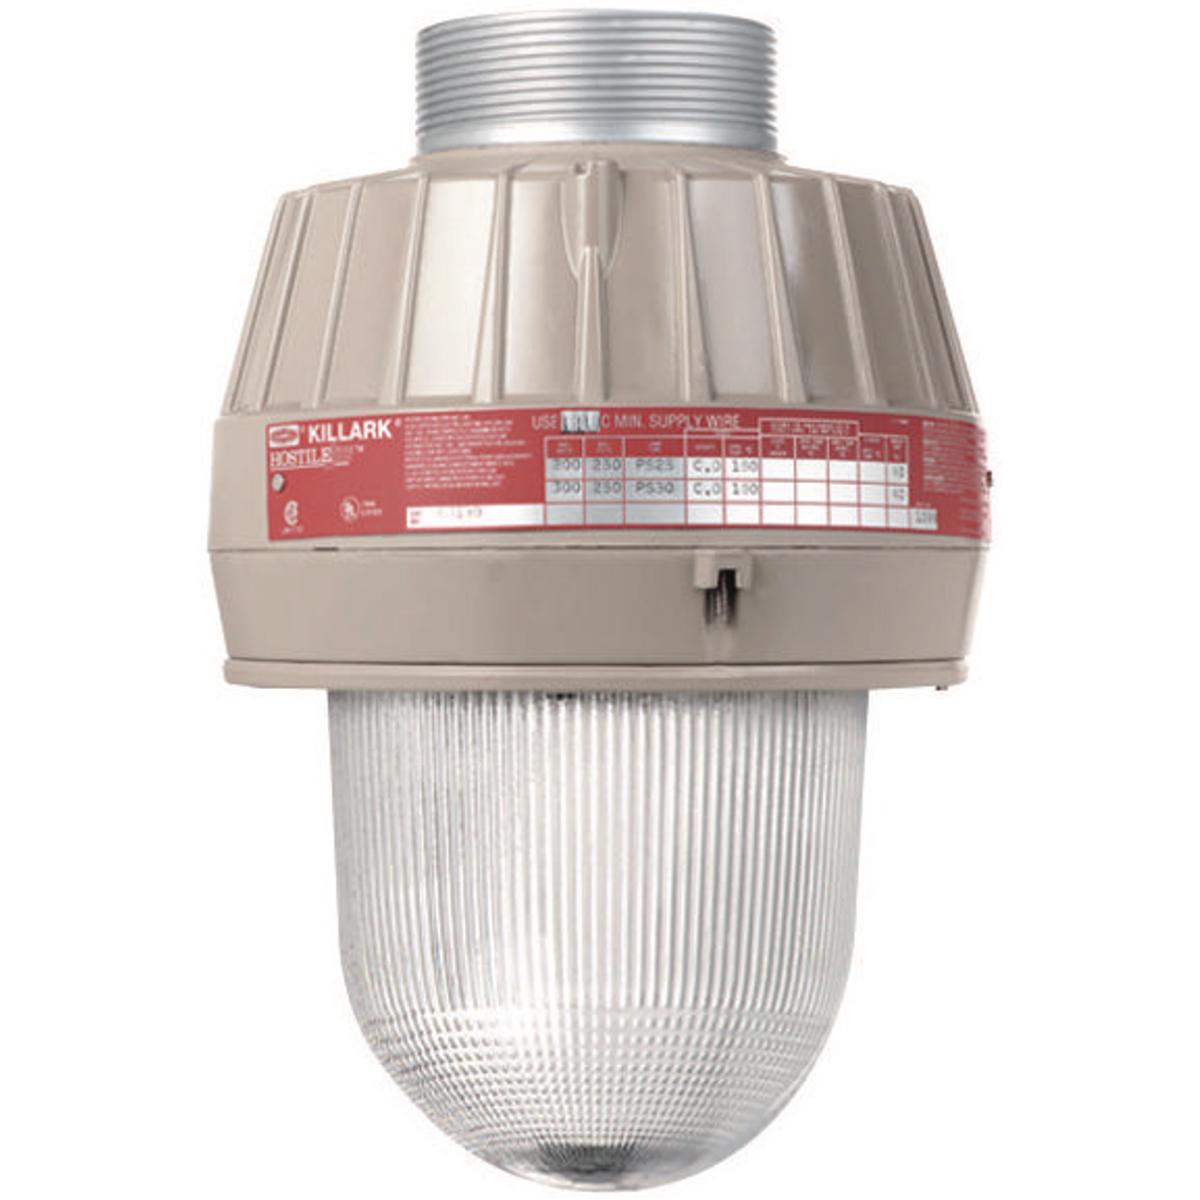 Hubbell EMI30ML Incandescent 2/300W Tank Assembly ML  ; Four light sources—Incandescent, compact fluorescent, high pressure sodium and metal halide ; Mounting choice—Pendant, ceiling, 25˚ stanchion or 90˚ wall mount, all with “wireless” design that allows fast, easy fixt